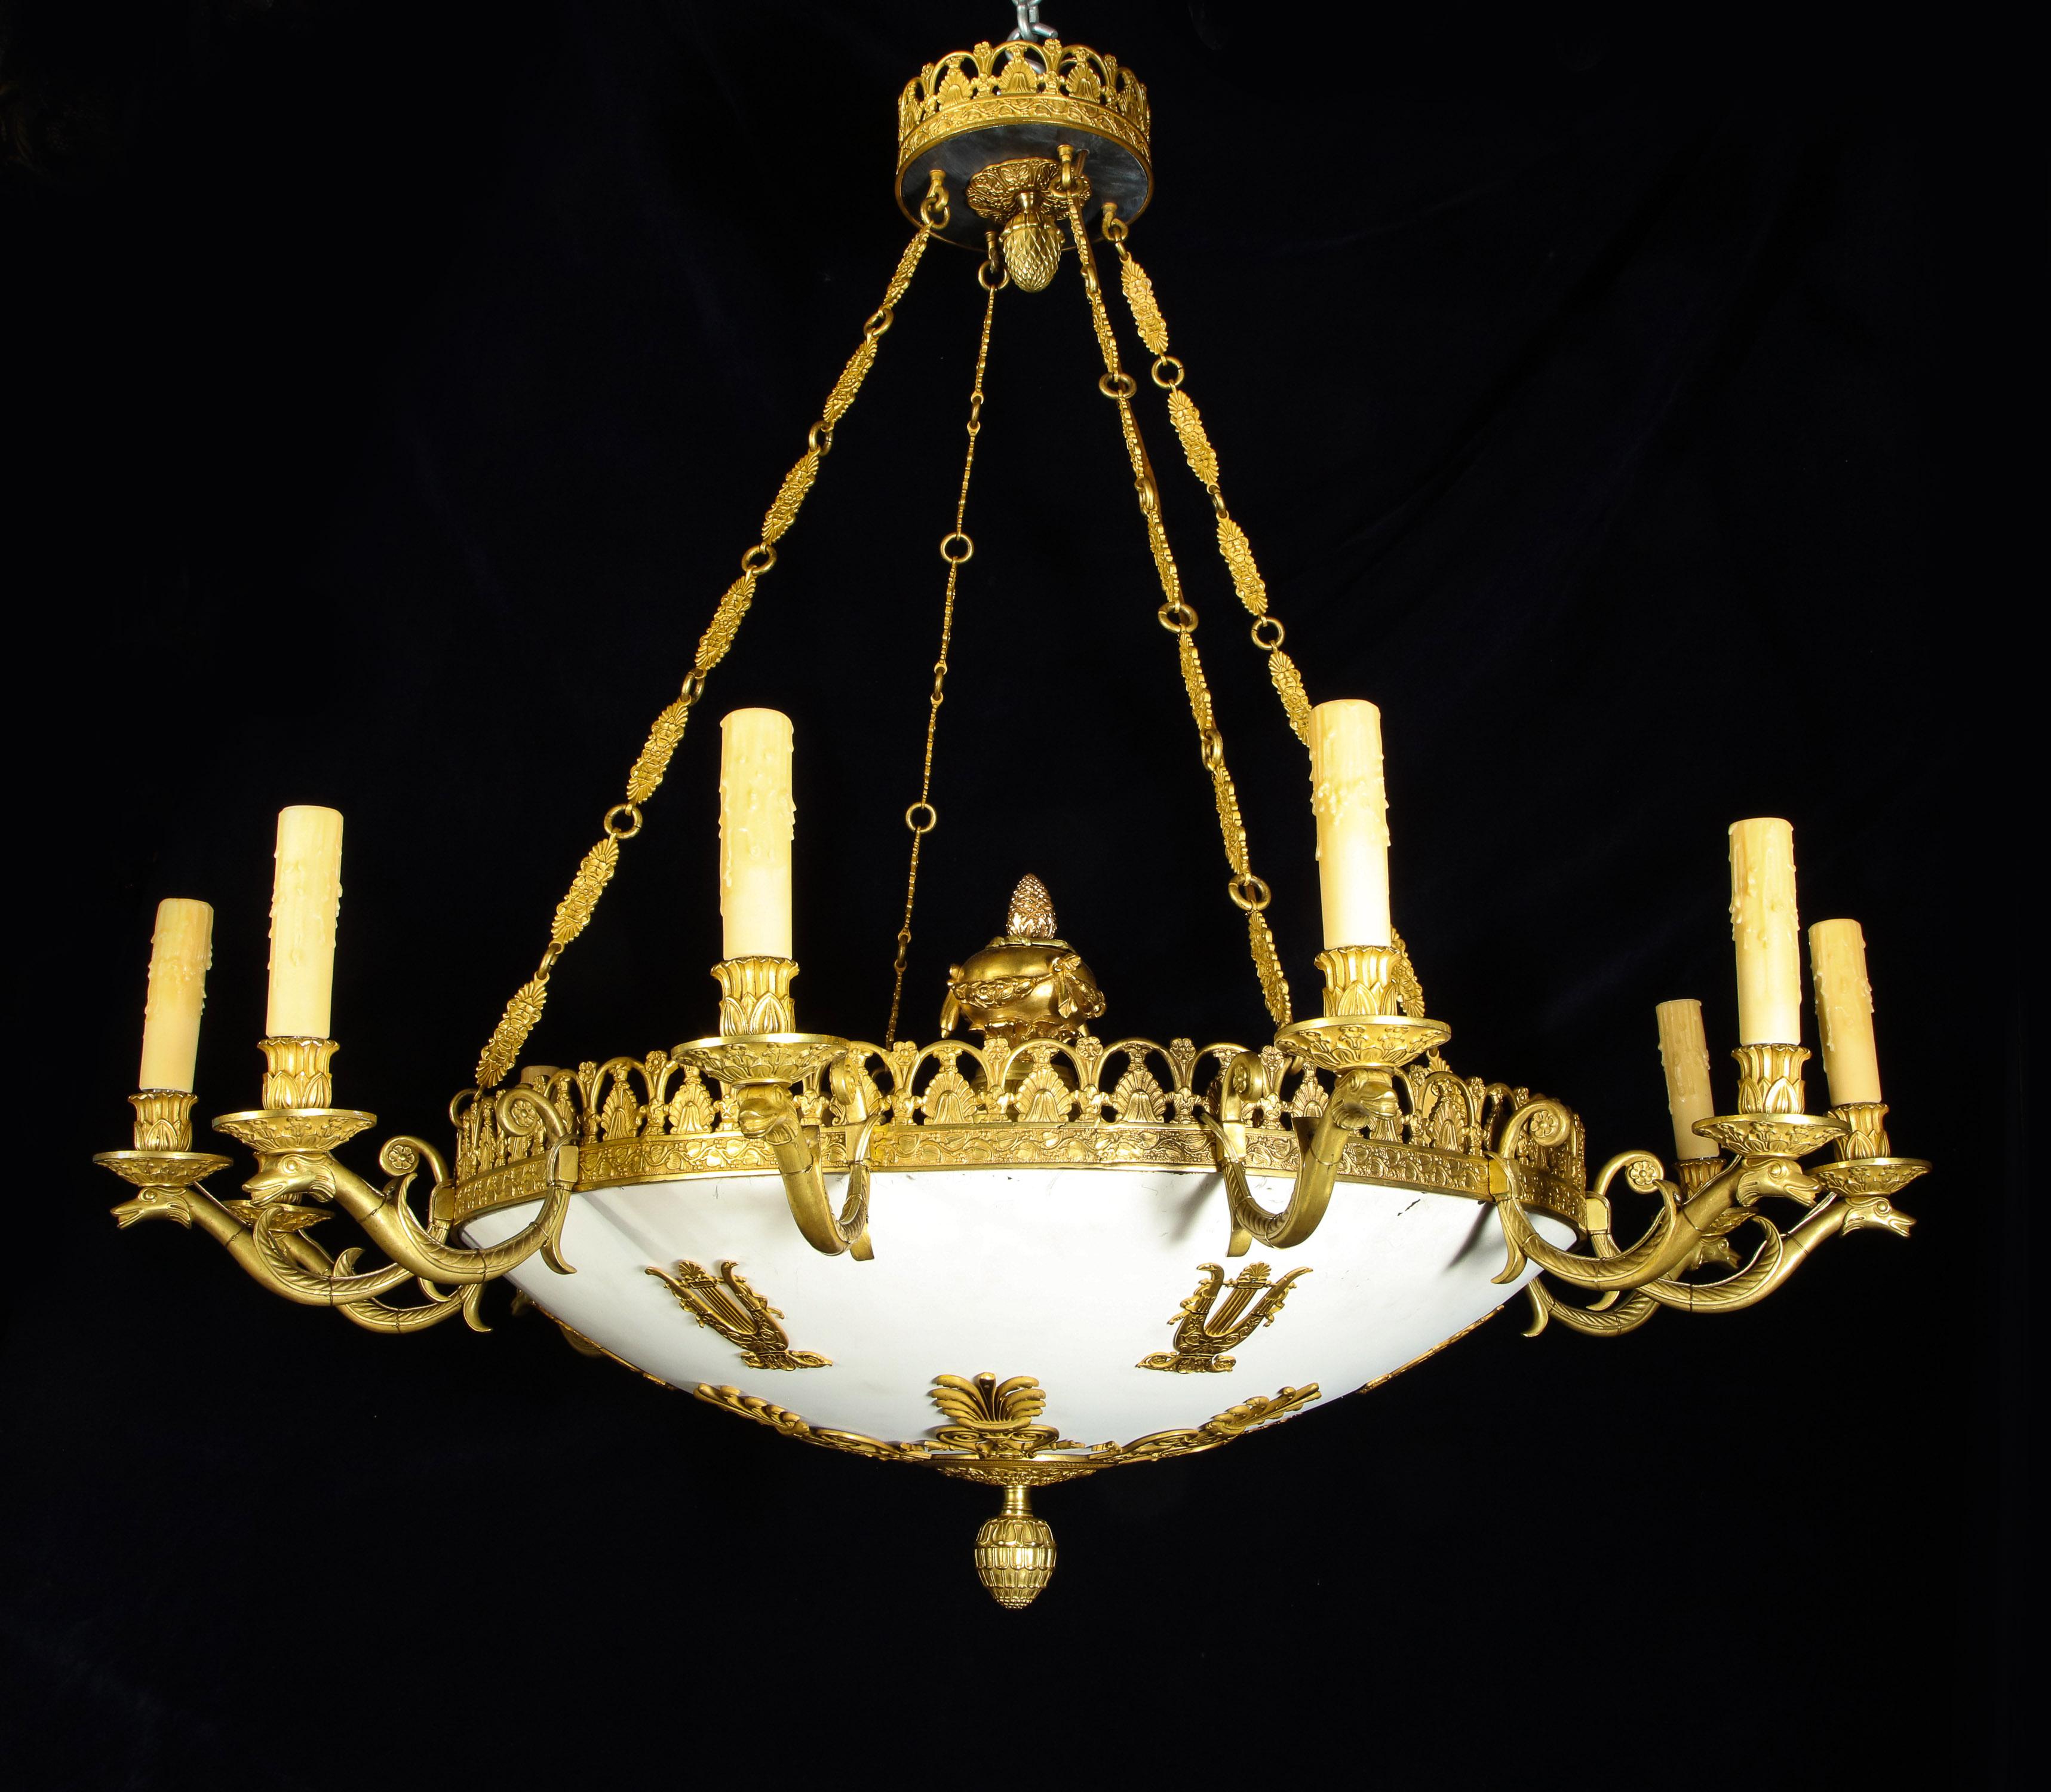 Pair of Large and Important Antique French Empire Gilt Bronze Chandeliers For Sale 1